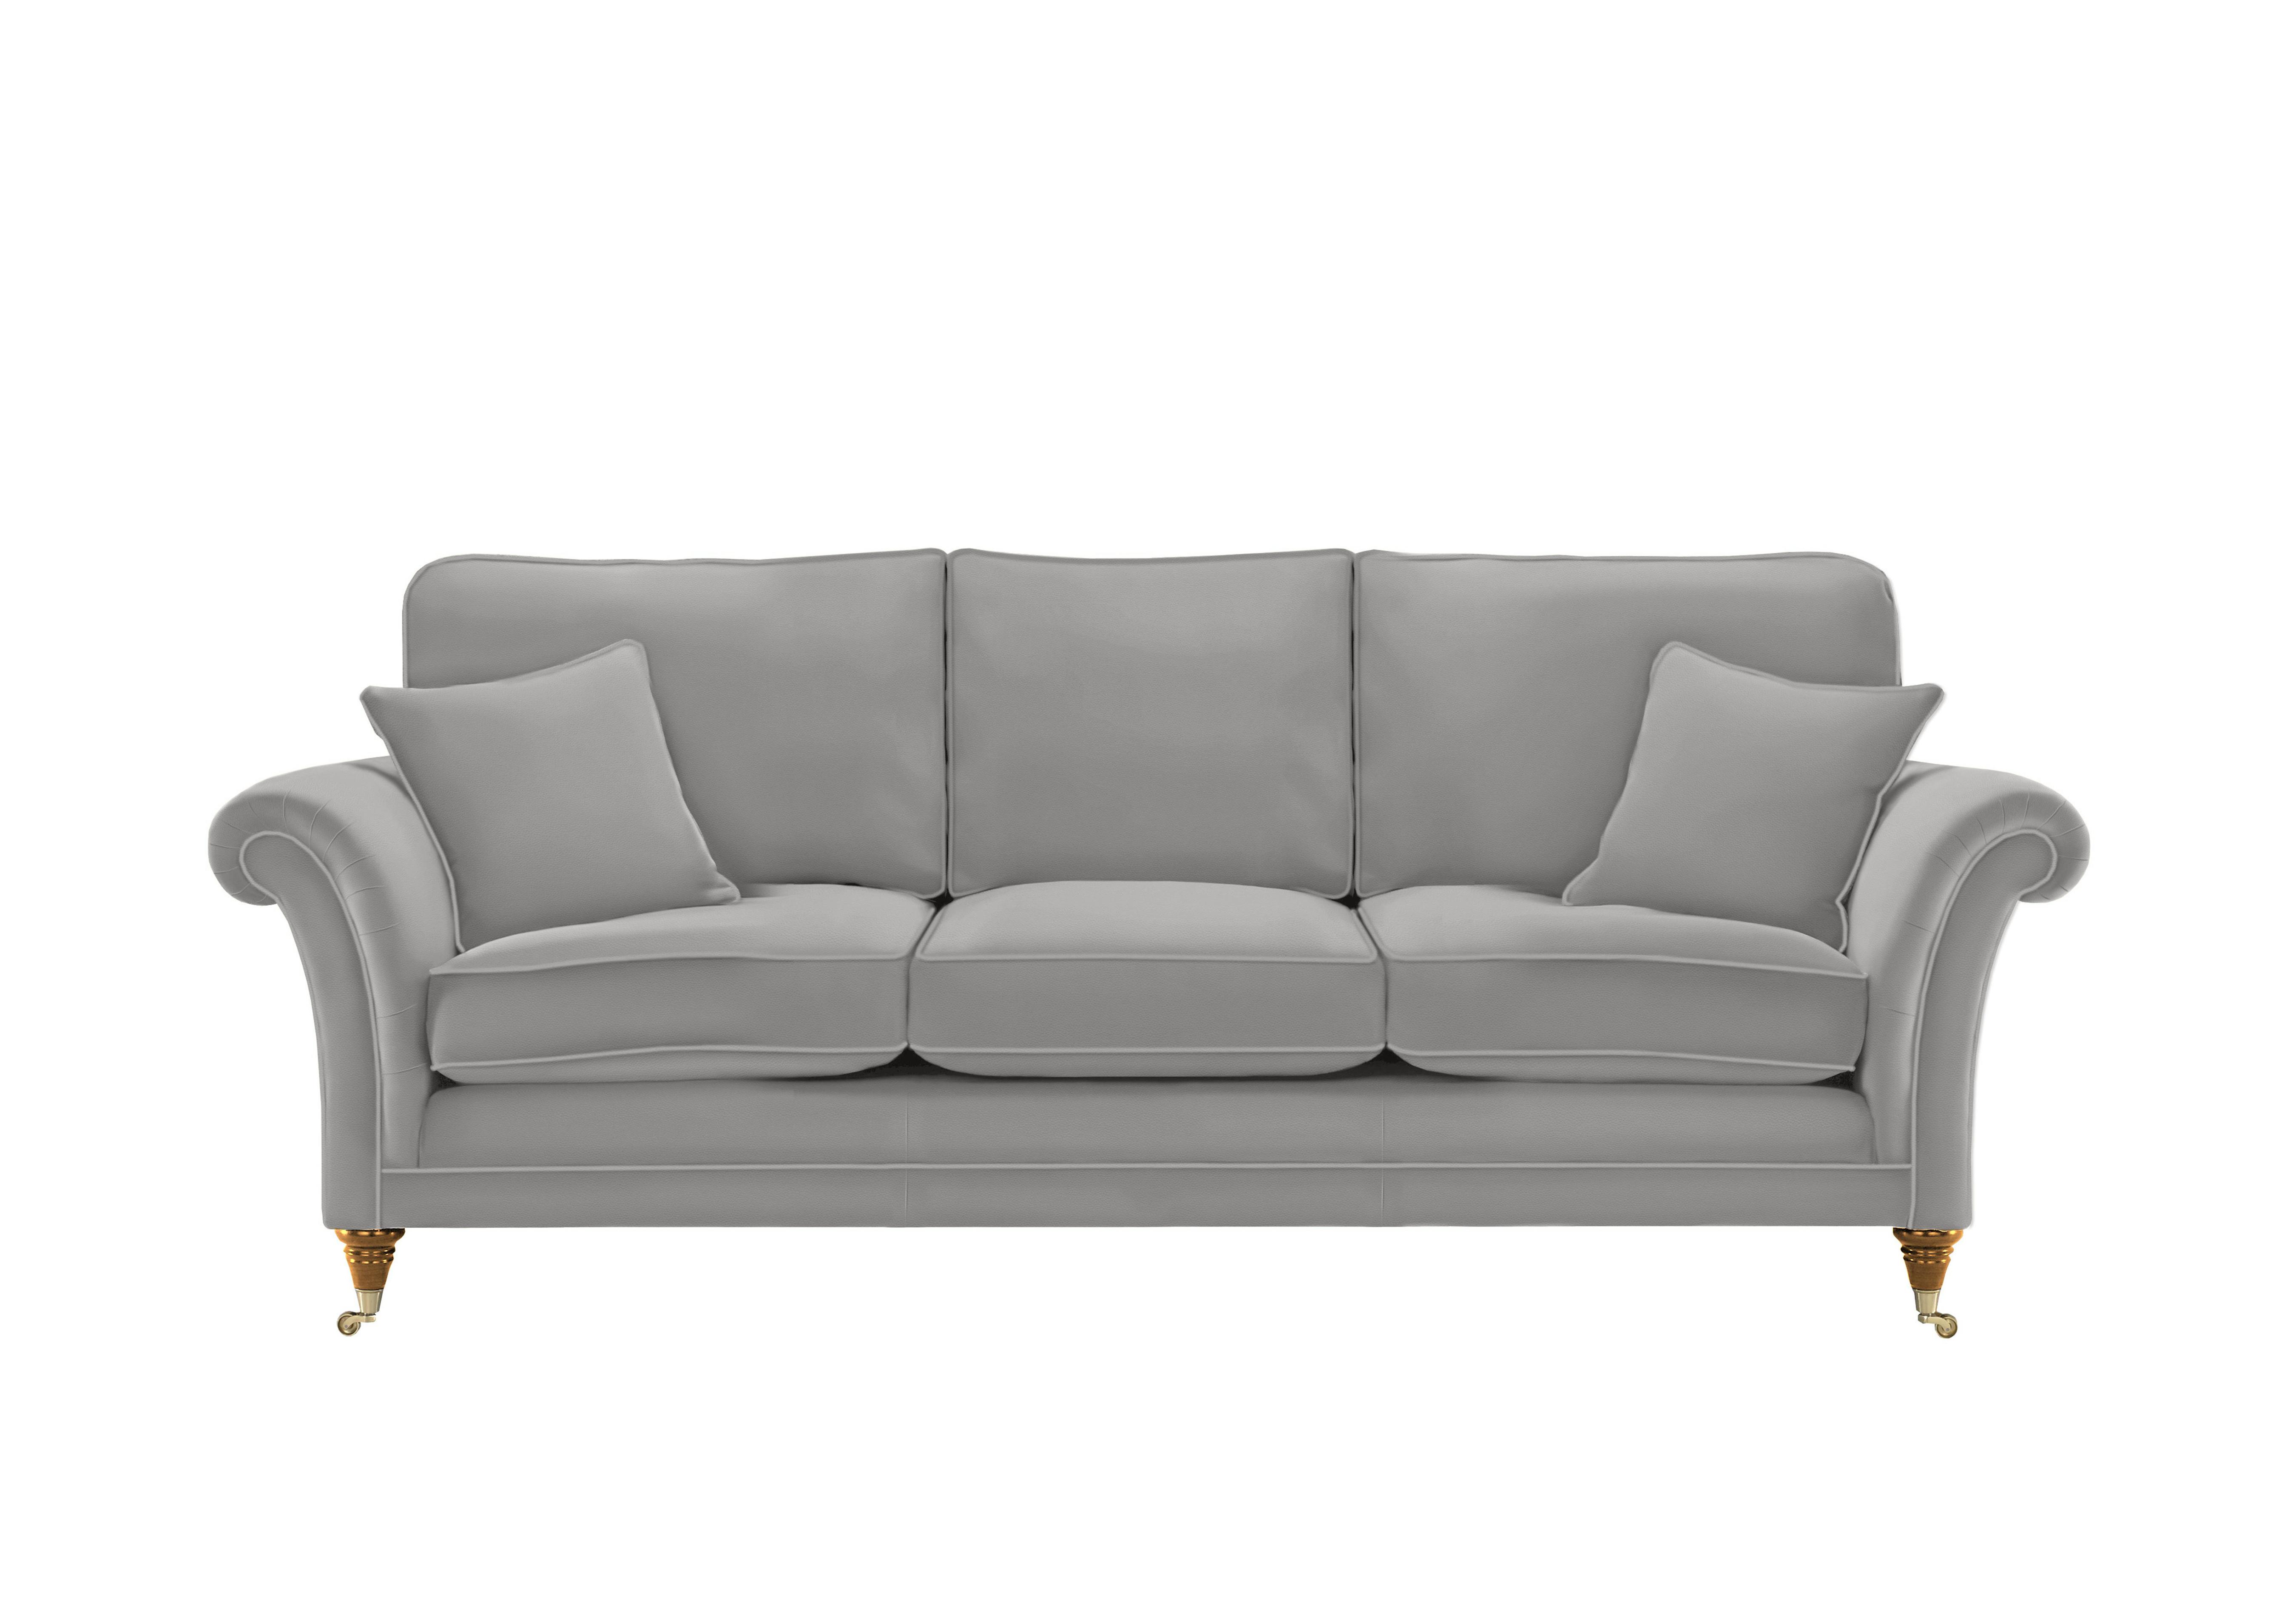 Burghley Grand Leather Sofa in 009019-0092 Roma Steel on Furniture Village